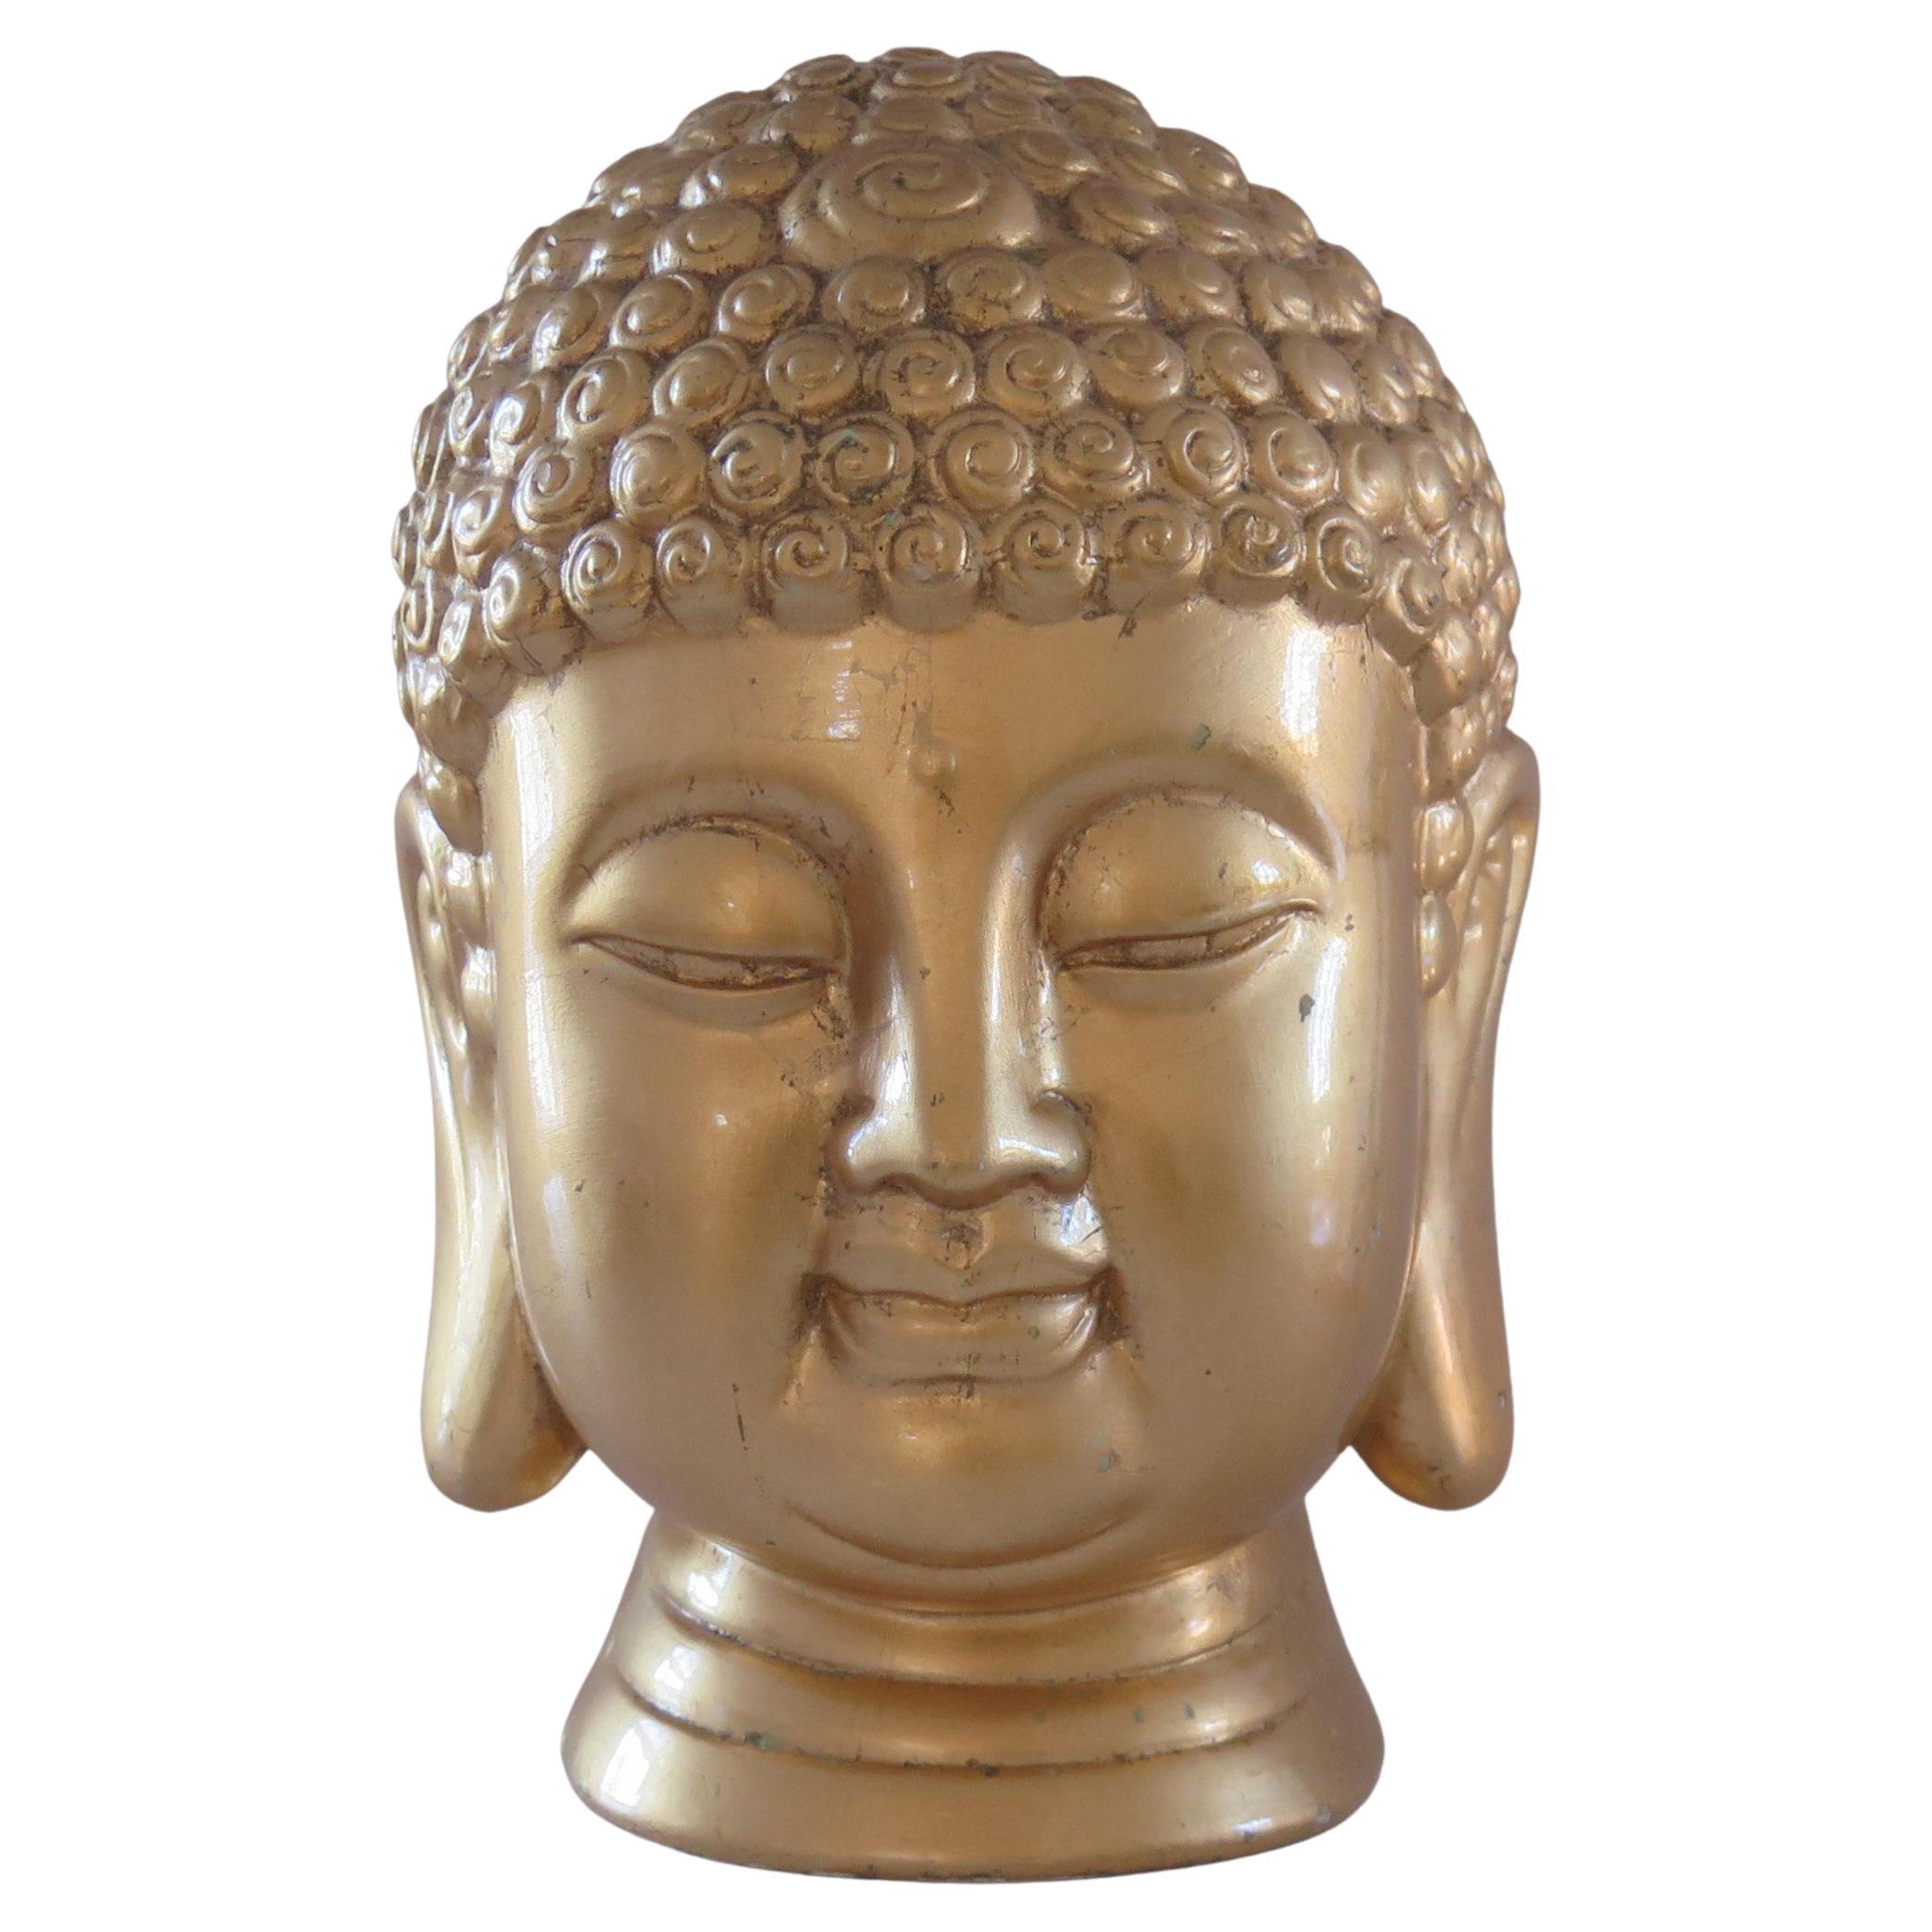 Large Ceramic Buddha Head or Bust with Real Gold Leaf, Asian Circa 1920s For Sale